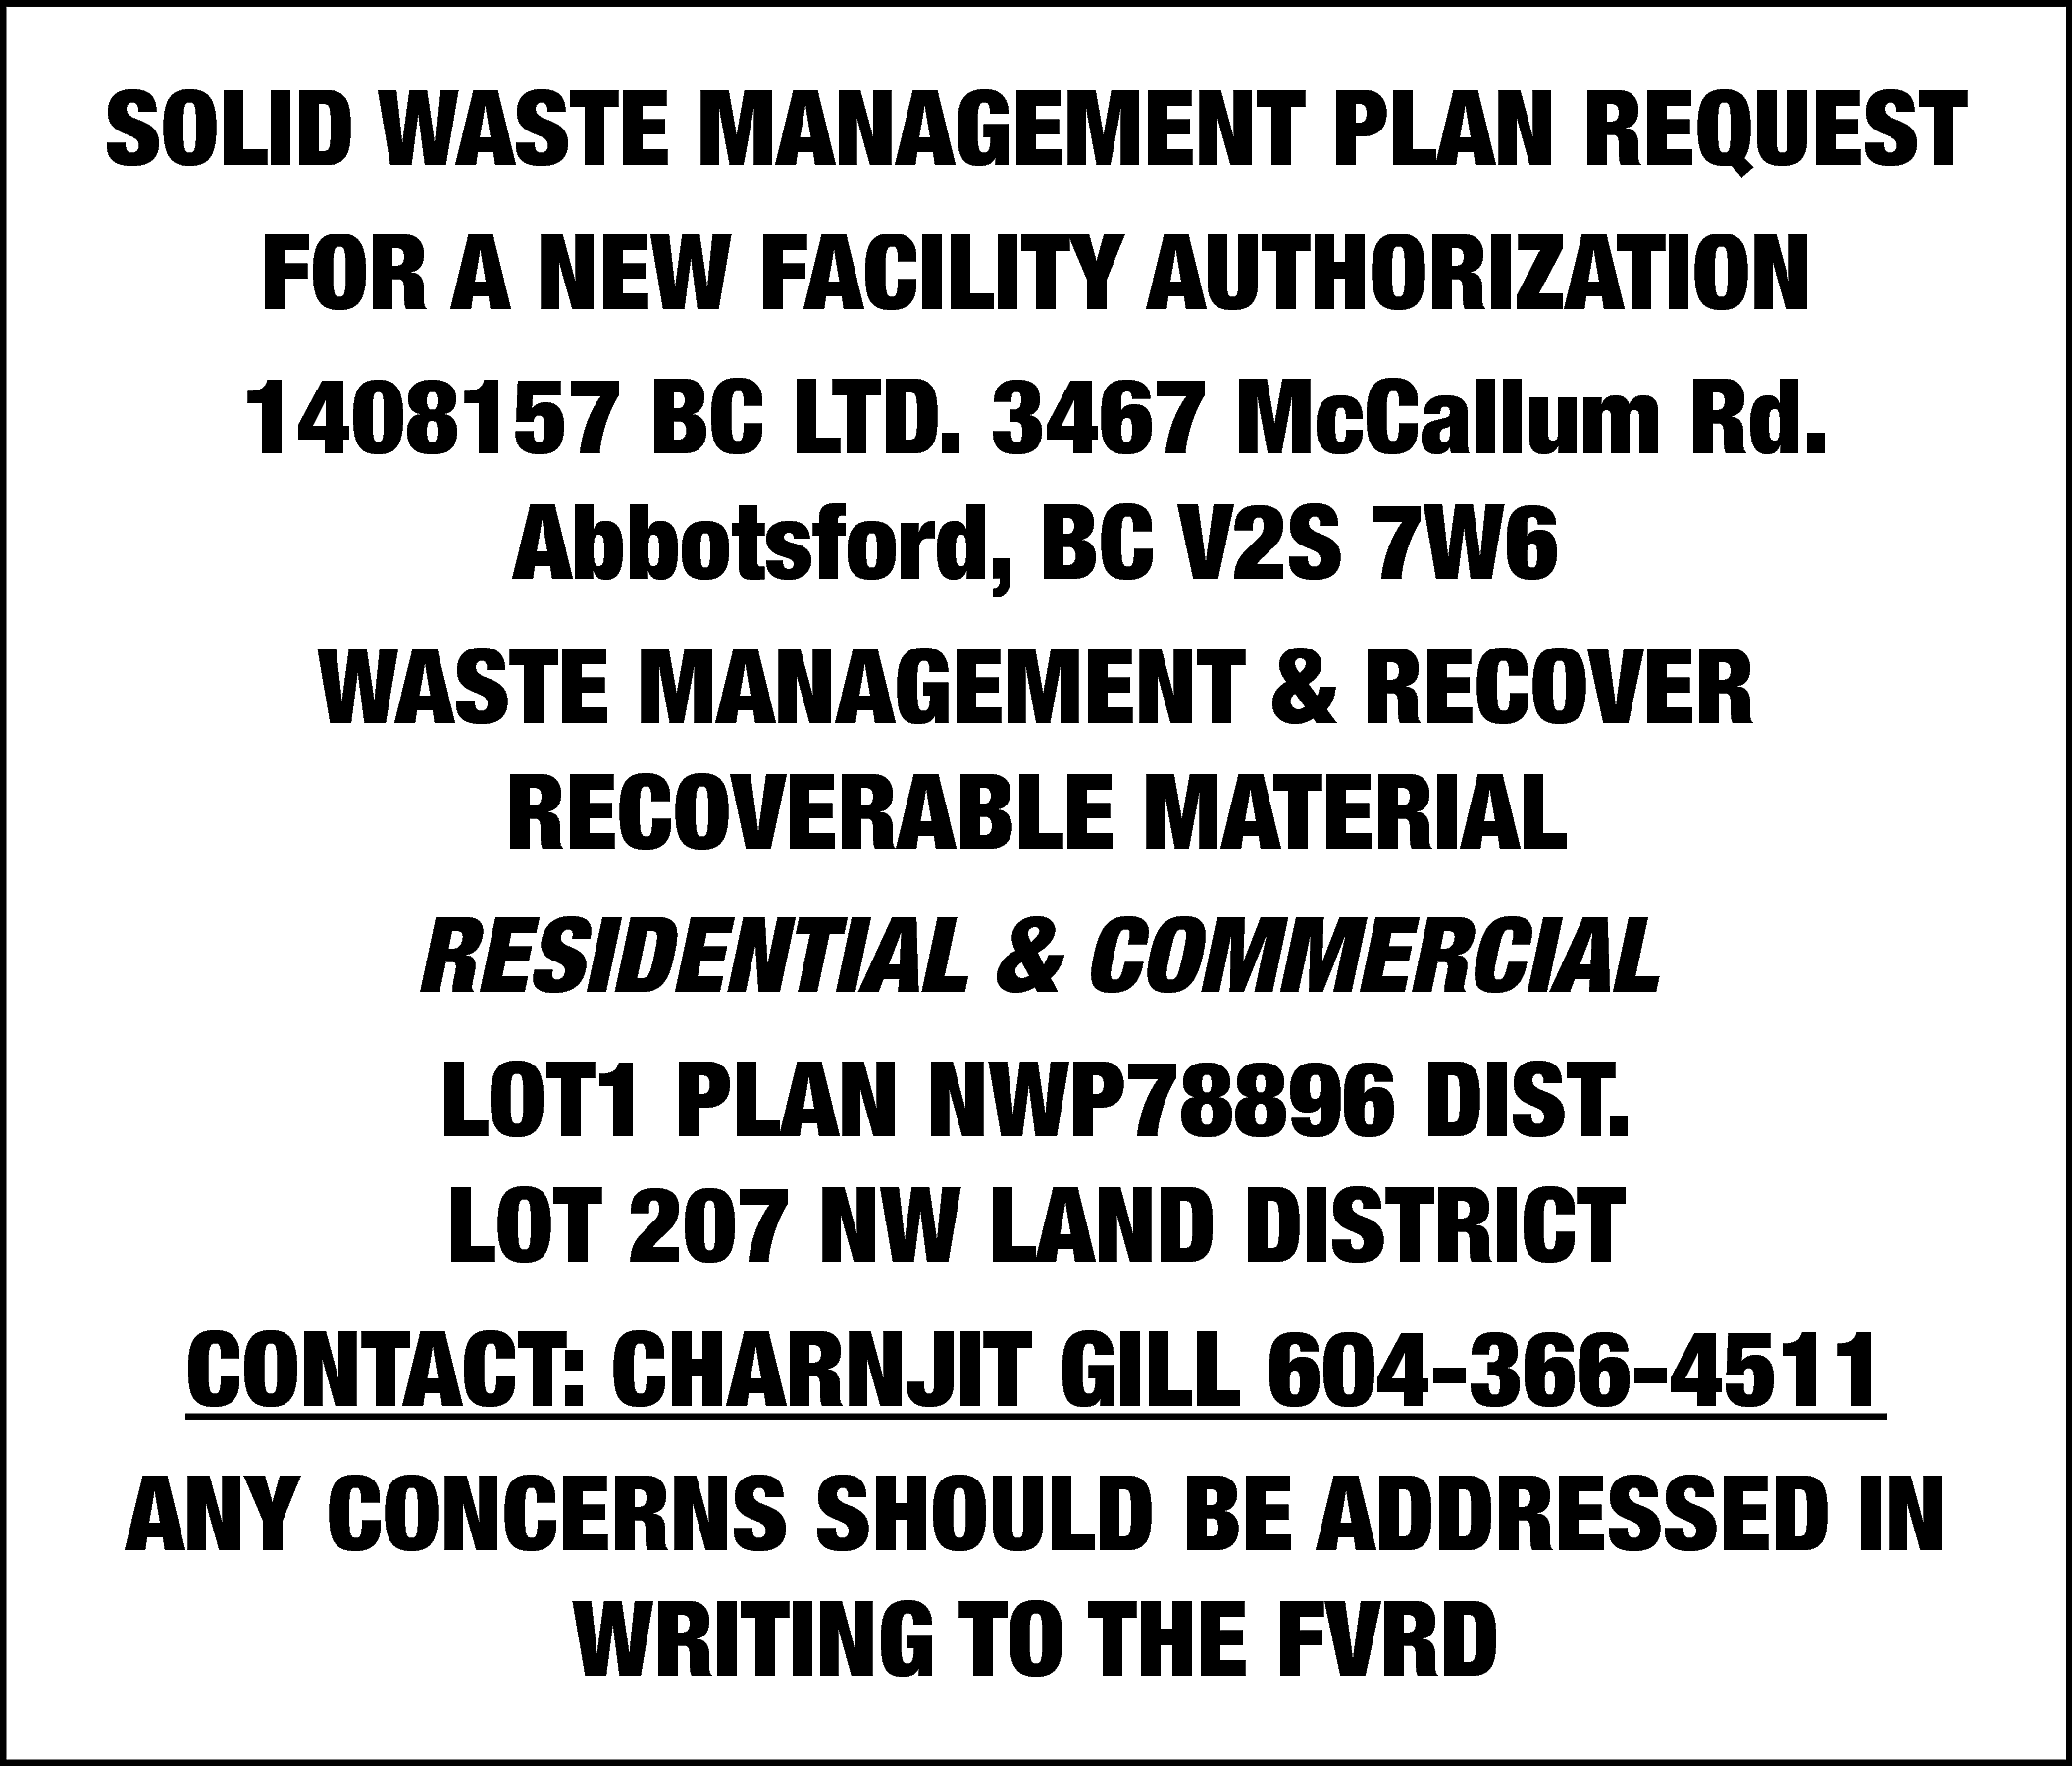 SOLID WASTE MANAGEMENT PLAN REQUEST  SOLID WASTE MANAGEMENT PLAN REQUEST  FOR A NEW FACILITY AUTHORIZATION  1408157 BC LTD. 3467 McCallum Rd.  Abbotsford, BC V2S 7W6  WASTE MANAGEMENT & RECOVER  RECOVERABLE MATERIAL  RESIDENTIAL & COMMERCIAL  LOT1 PLAN NWP78896 DIST.  LOT 207 NW LAND DISTRICT  CONTACT: CHARNJIT GILL 604-366-4511  ANY CONCERNS SHOULD BE ADDRESSED IN  WRITING TO THE FVRD    